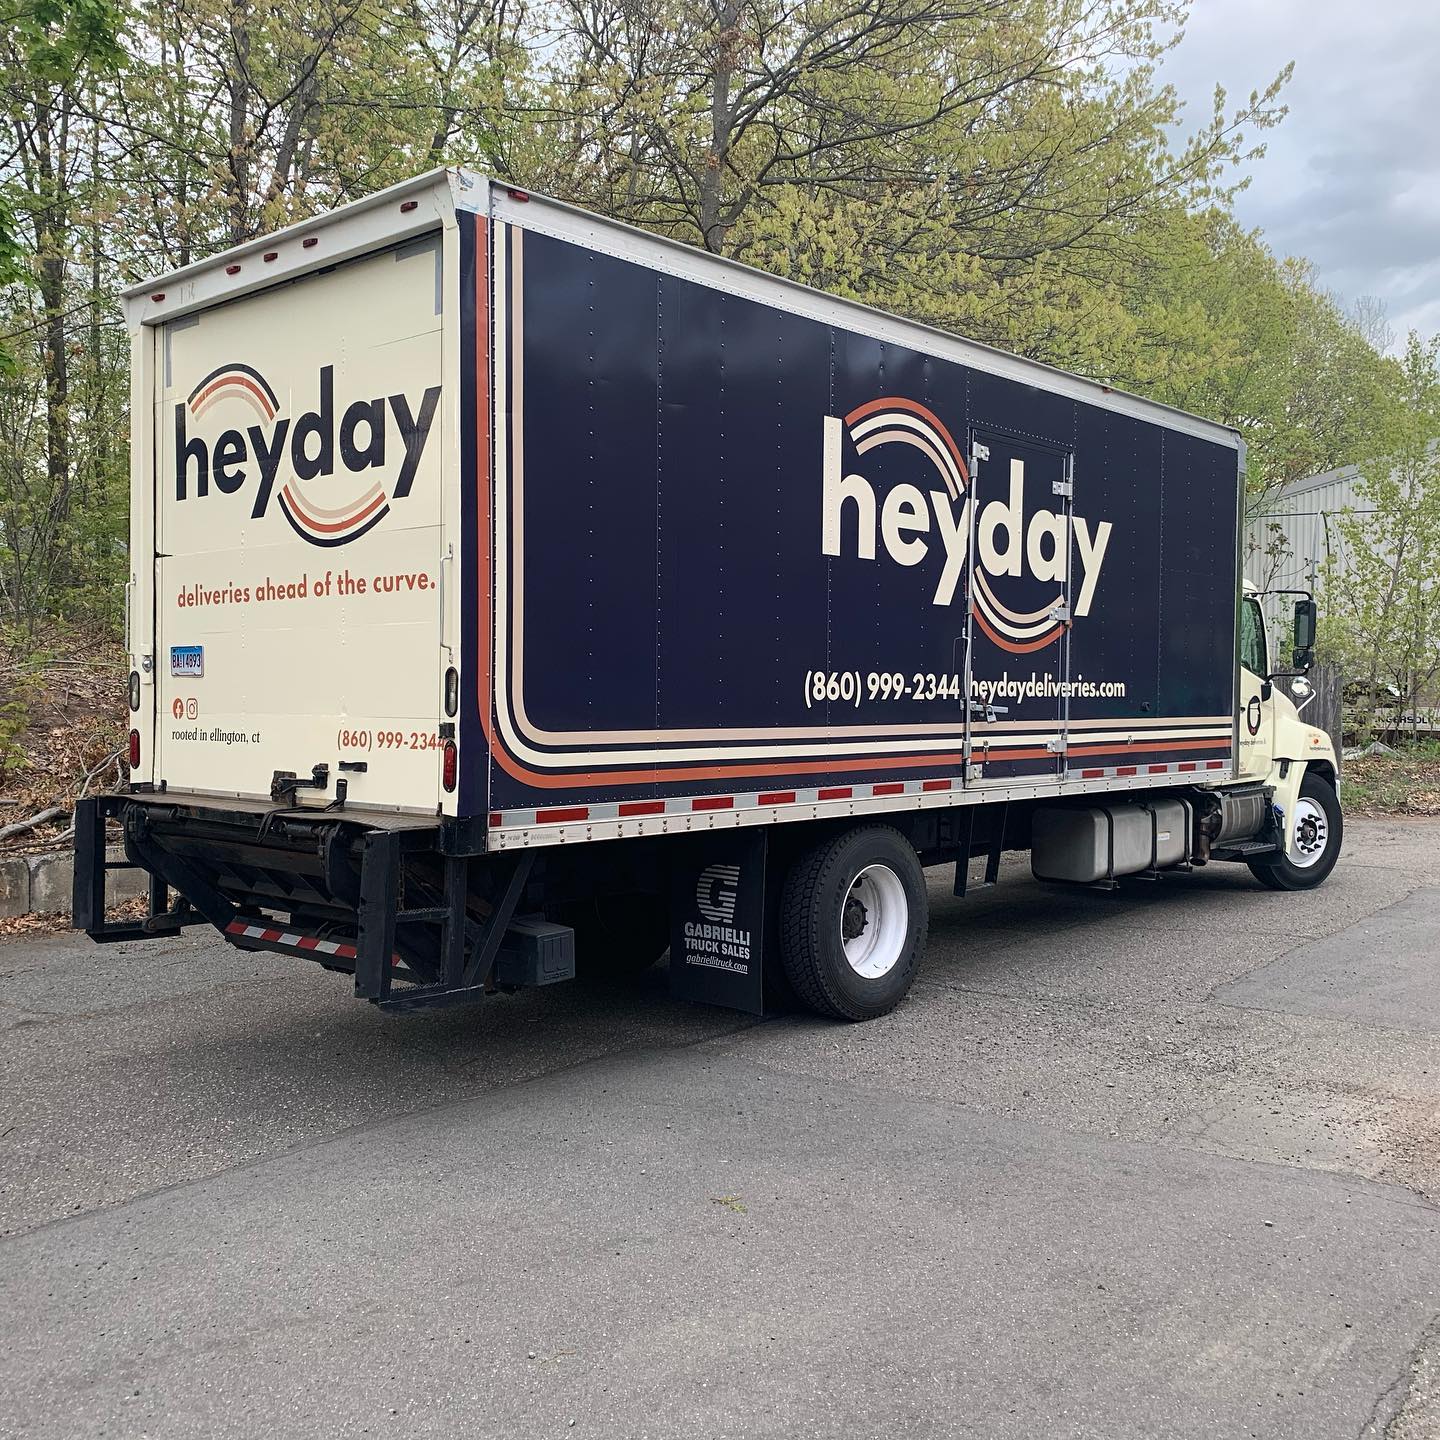 Hyeday Deliveries